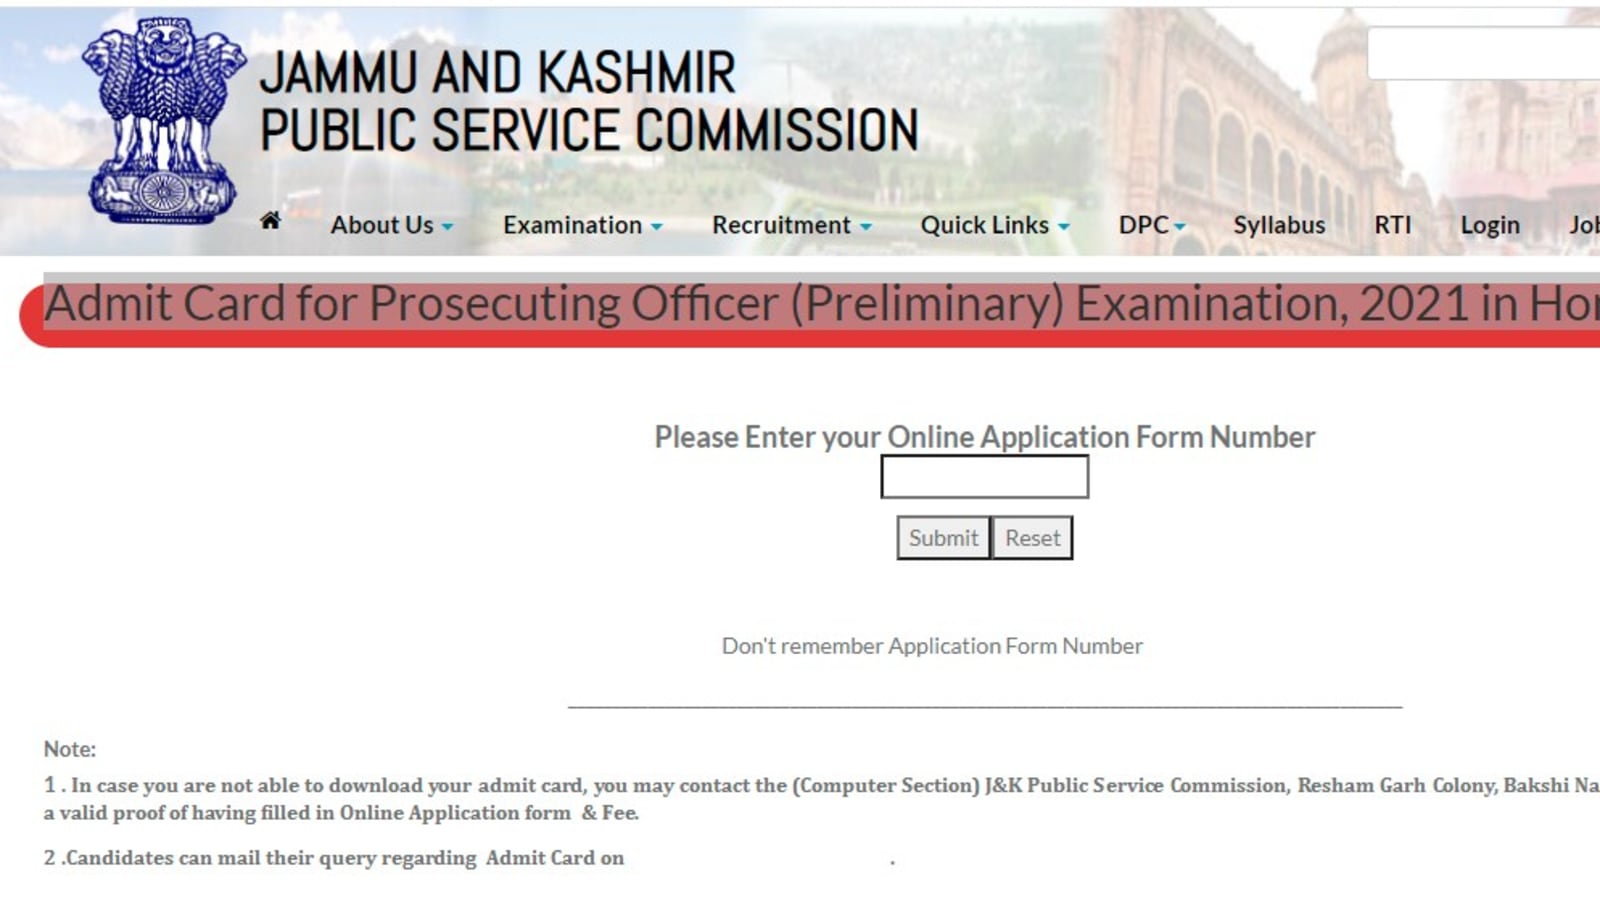 JKPSC admit cards released for August 25 exams at jkpsc.nic.in, direct links